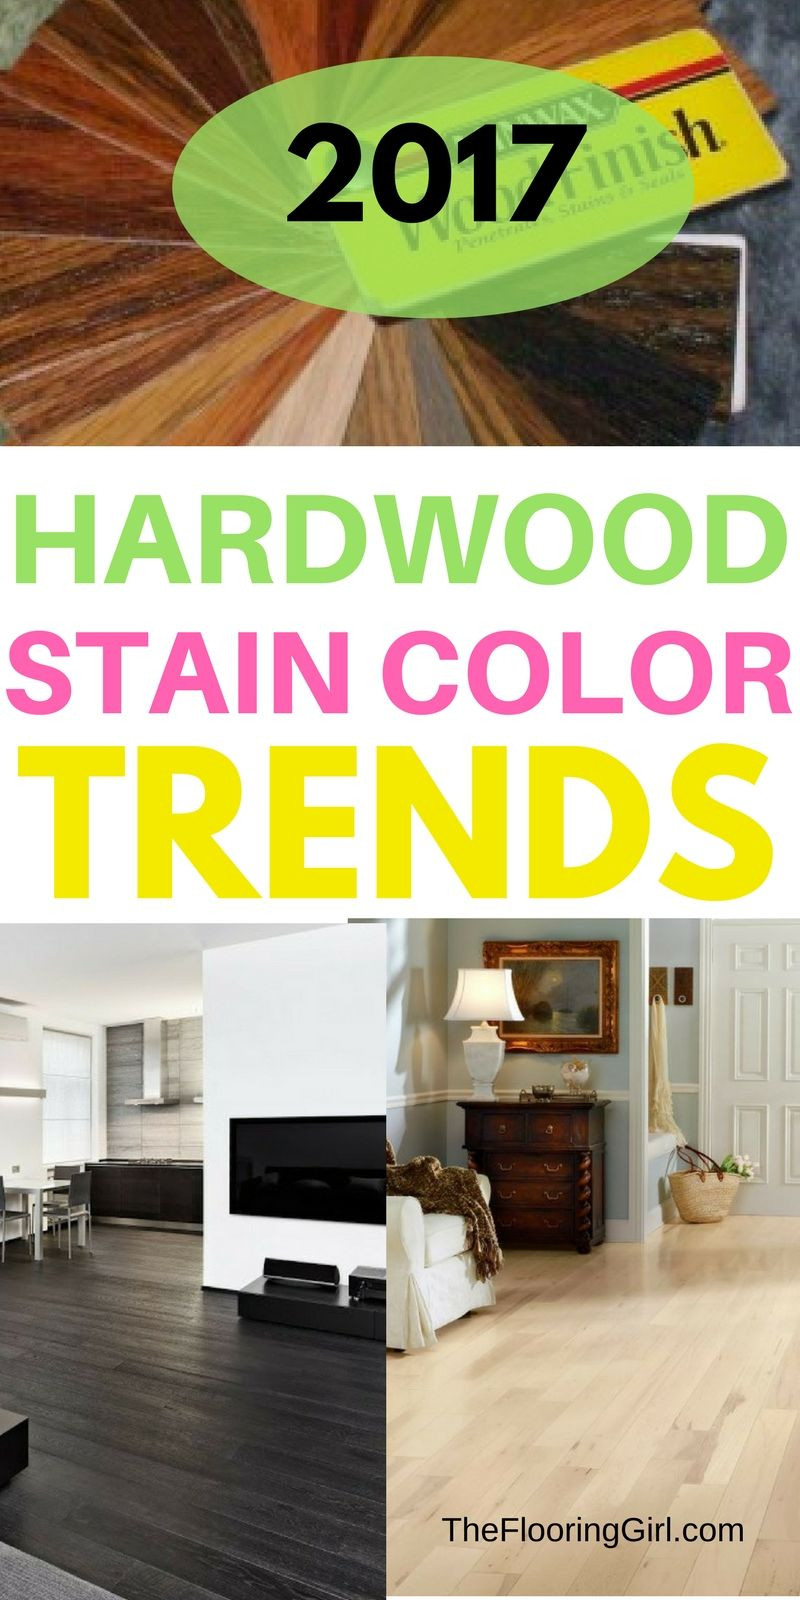 18 Stylish Best Hardwood Floor Vacuum 2017 2024 free download best hardwood floor vacuum 2017 of hardwood flooring stain color trends 2018 more from the flooring within hardwood flooring stain color trends for 2017 hardwood colors that are in style the